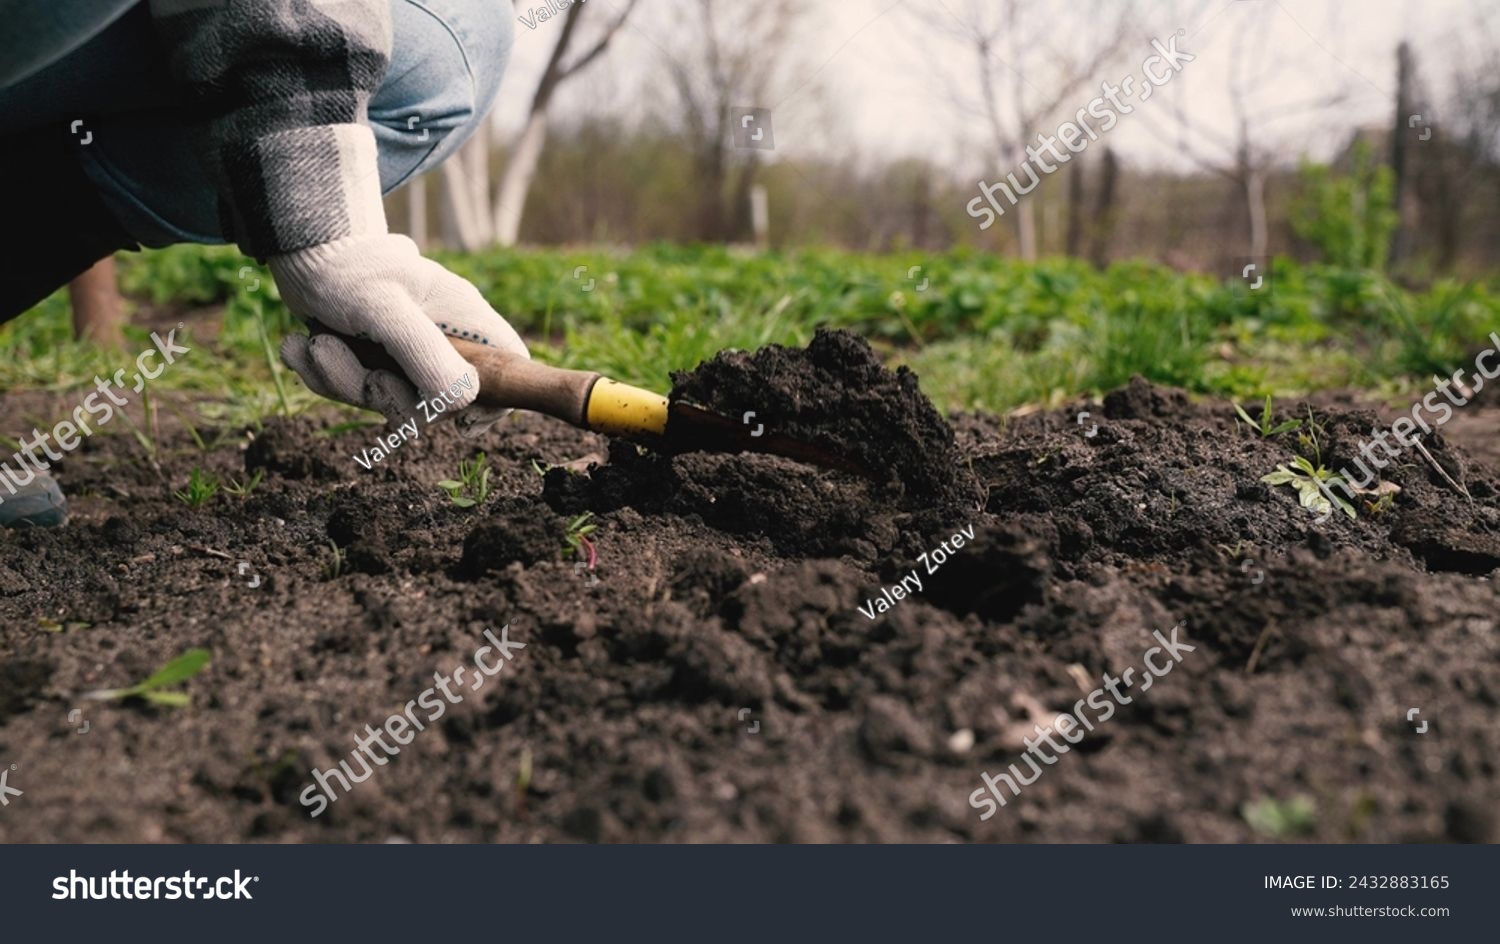 farmer digs ground with shovel, shovel, hands planting green sprout ground, agriculture, care environment, eco cultural farm, farmer plantation, eco-agriculture life concept, business ecology, improve #2432883165